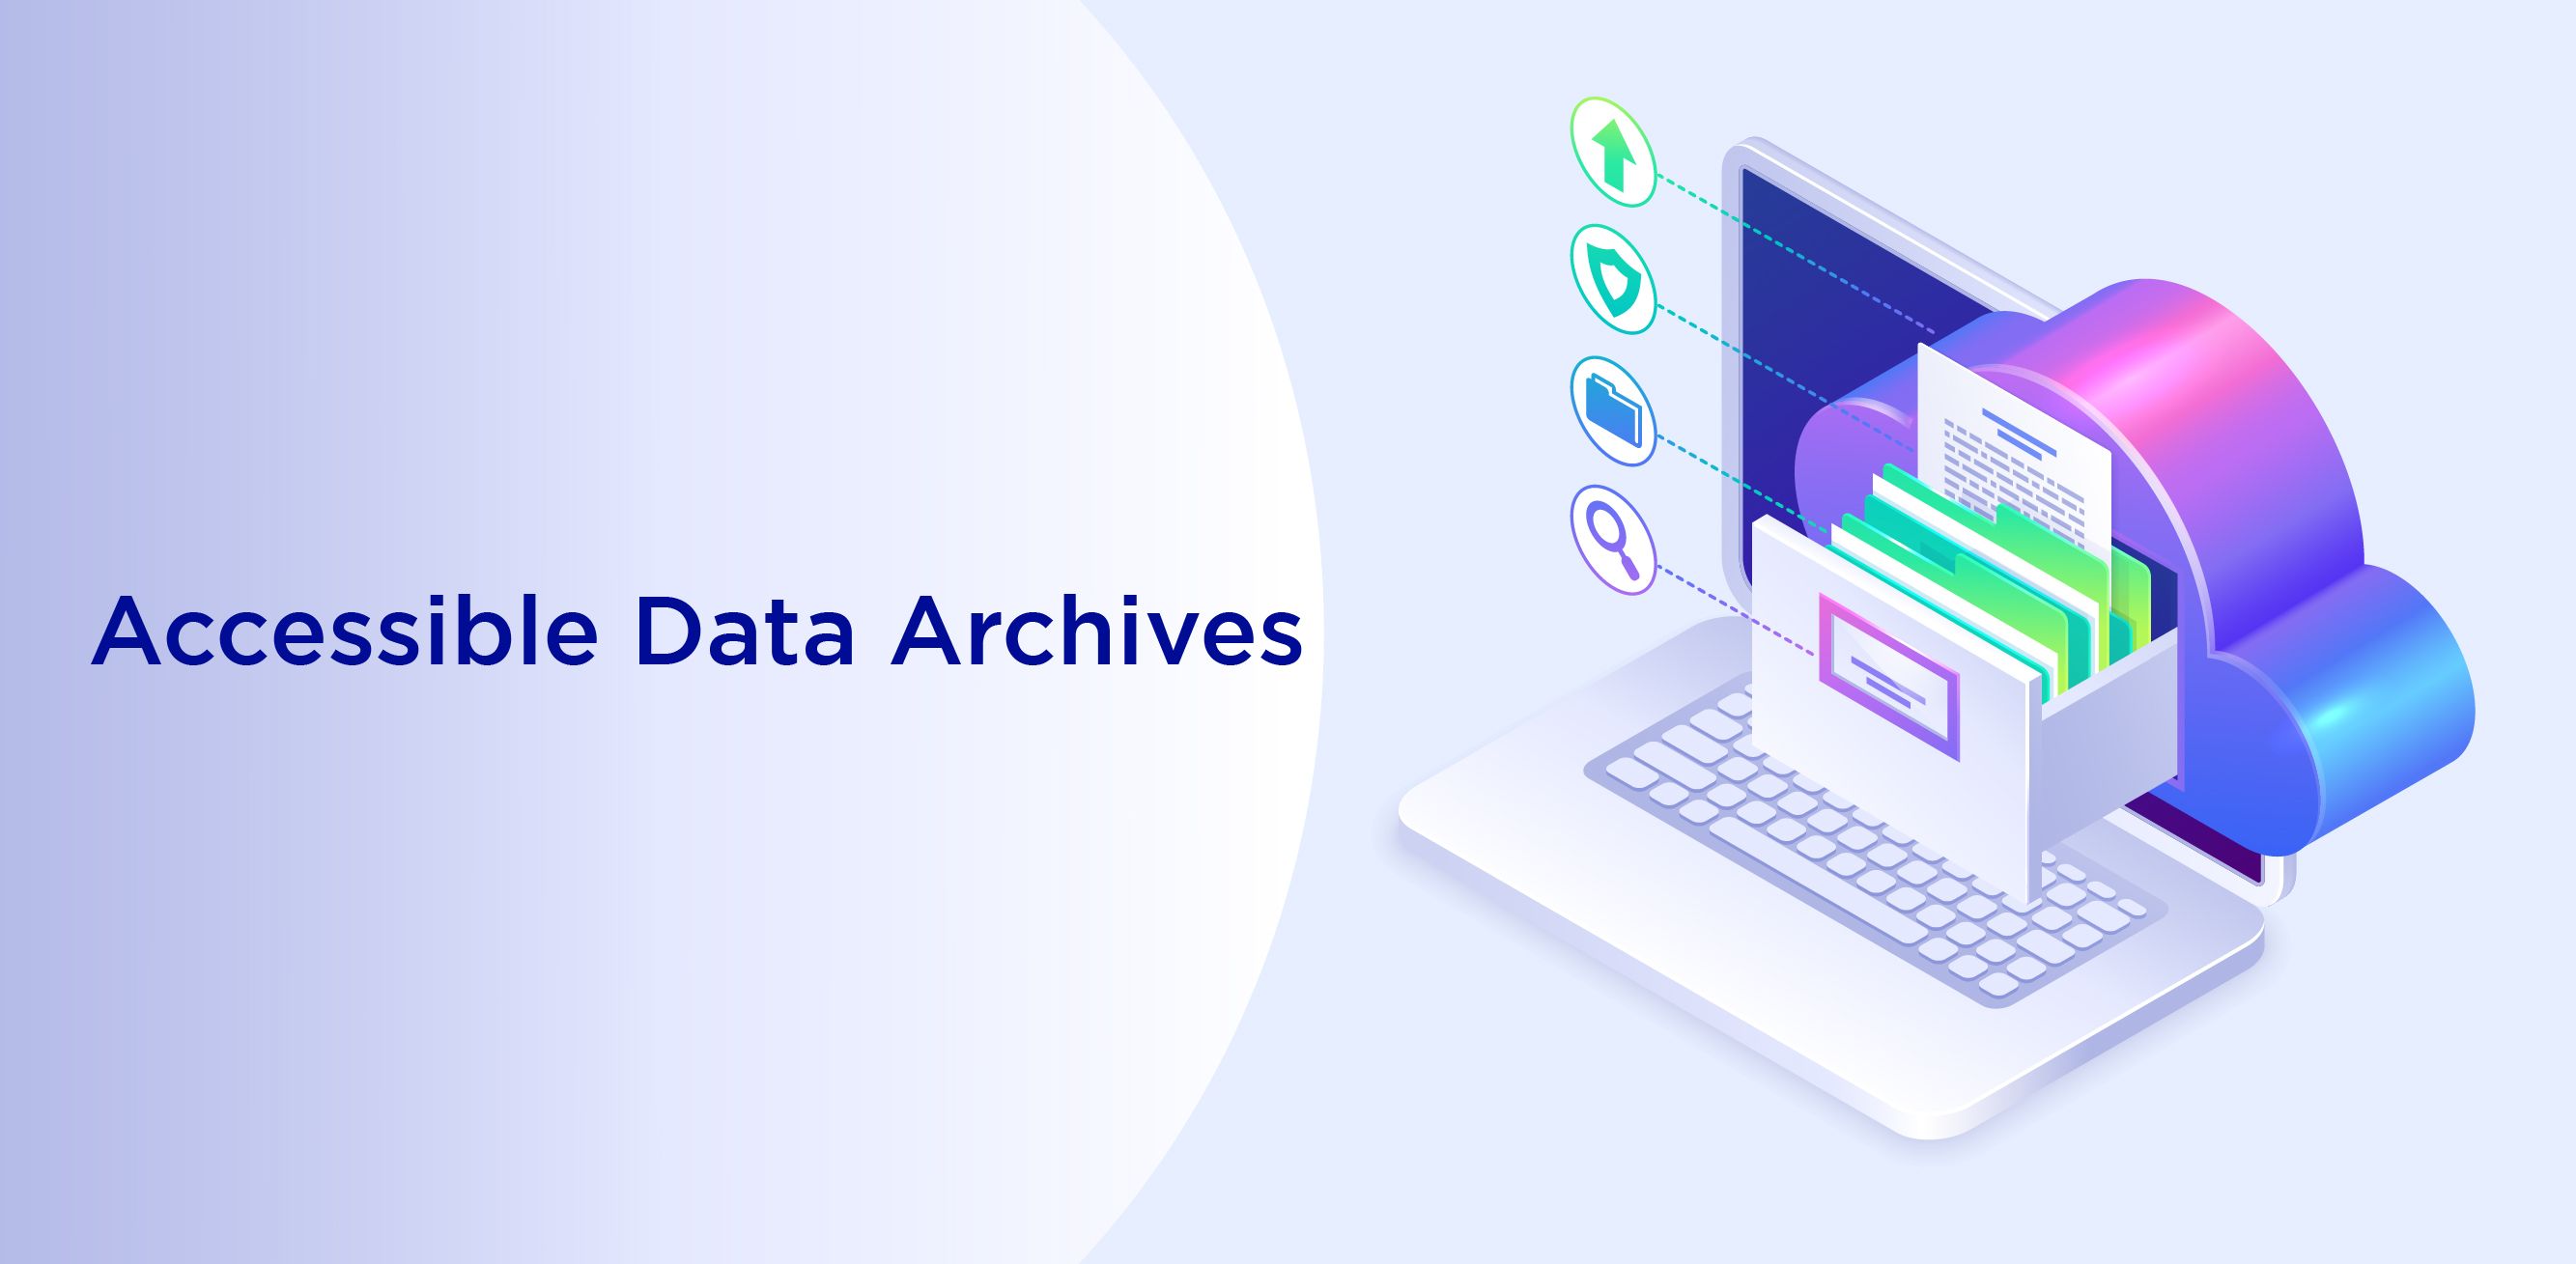 Accessible Data Archives